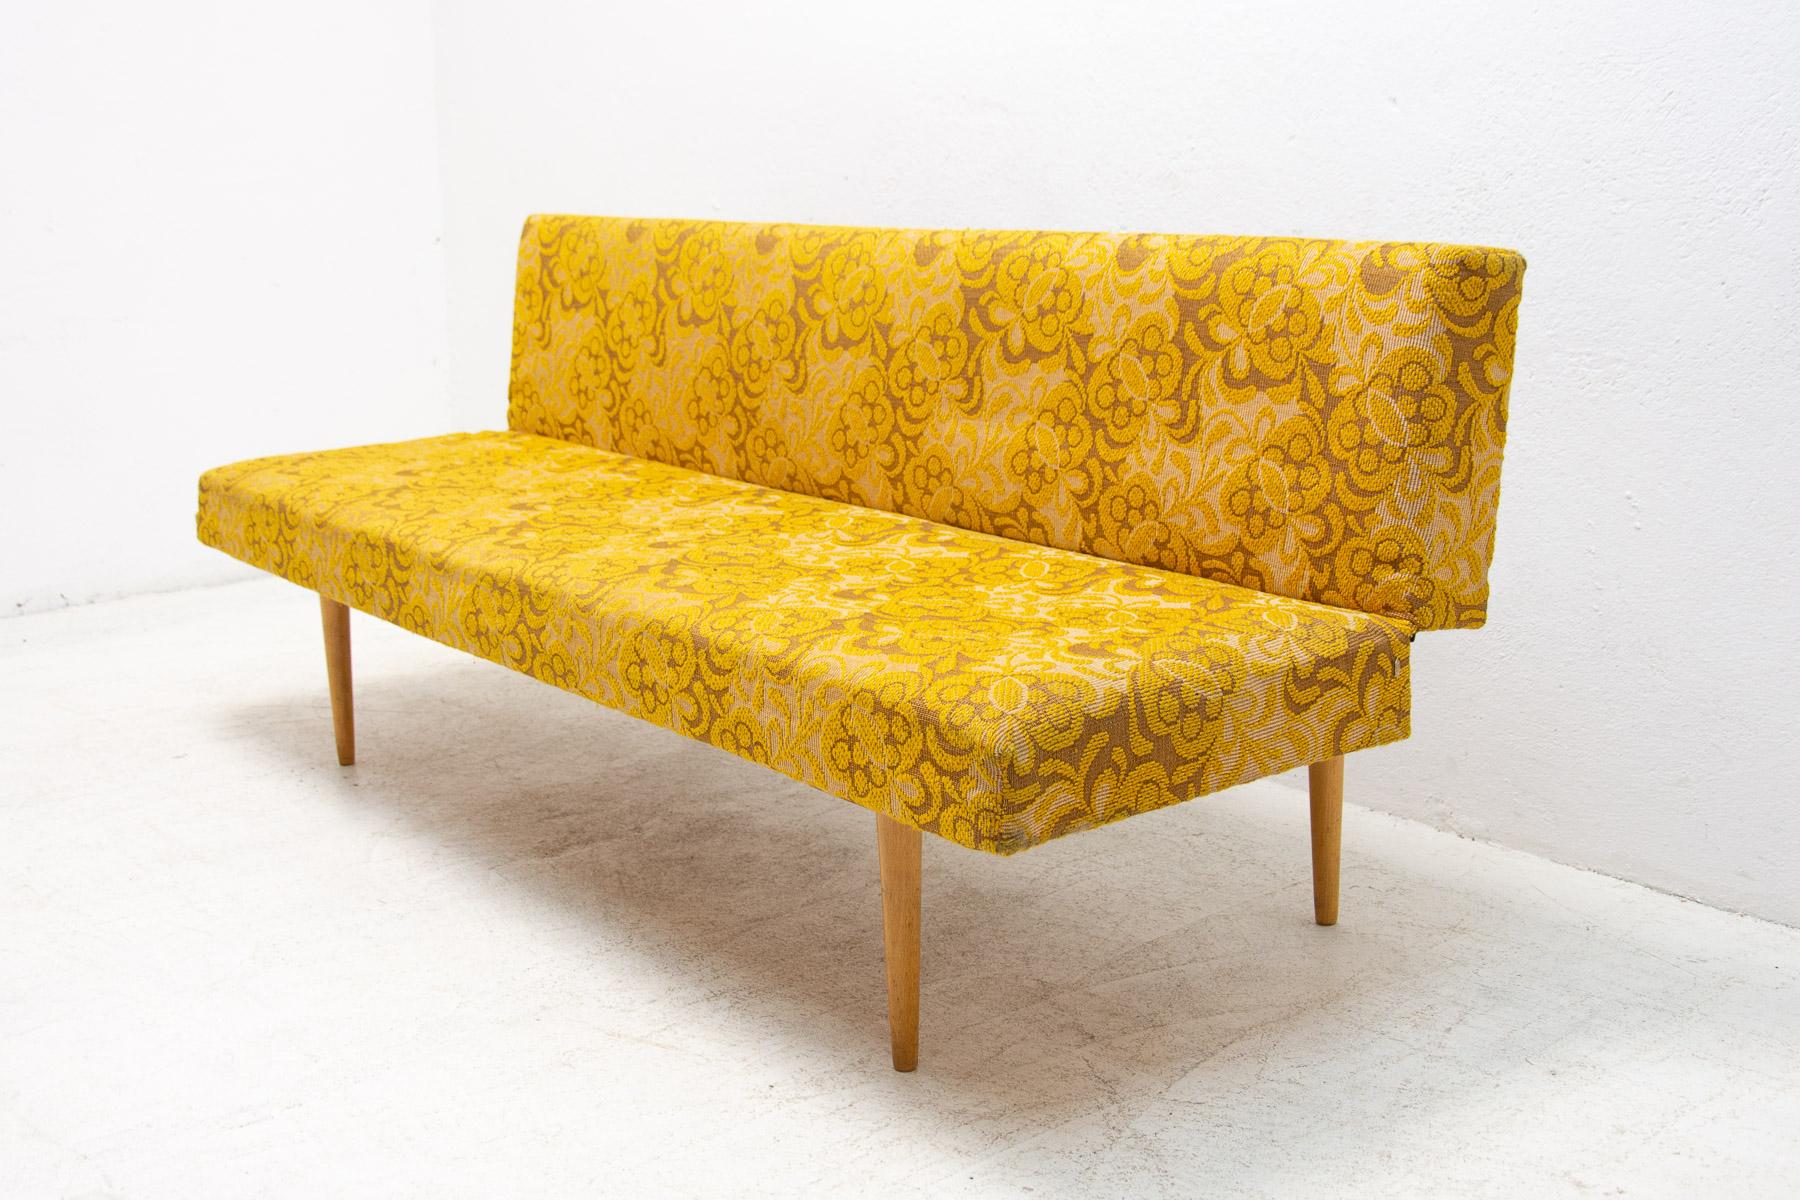 Mid century sofa/daybed, made in the former Czechoslovakia in the 1960´s, designed by Miroslav Navrátil. Material: beech wood, fabric. The sofa is in good Vintage condition.

Measures: Height: 73 cm

Lenght: 180 cm

Depth: 74 cm

Sleeping